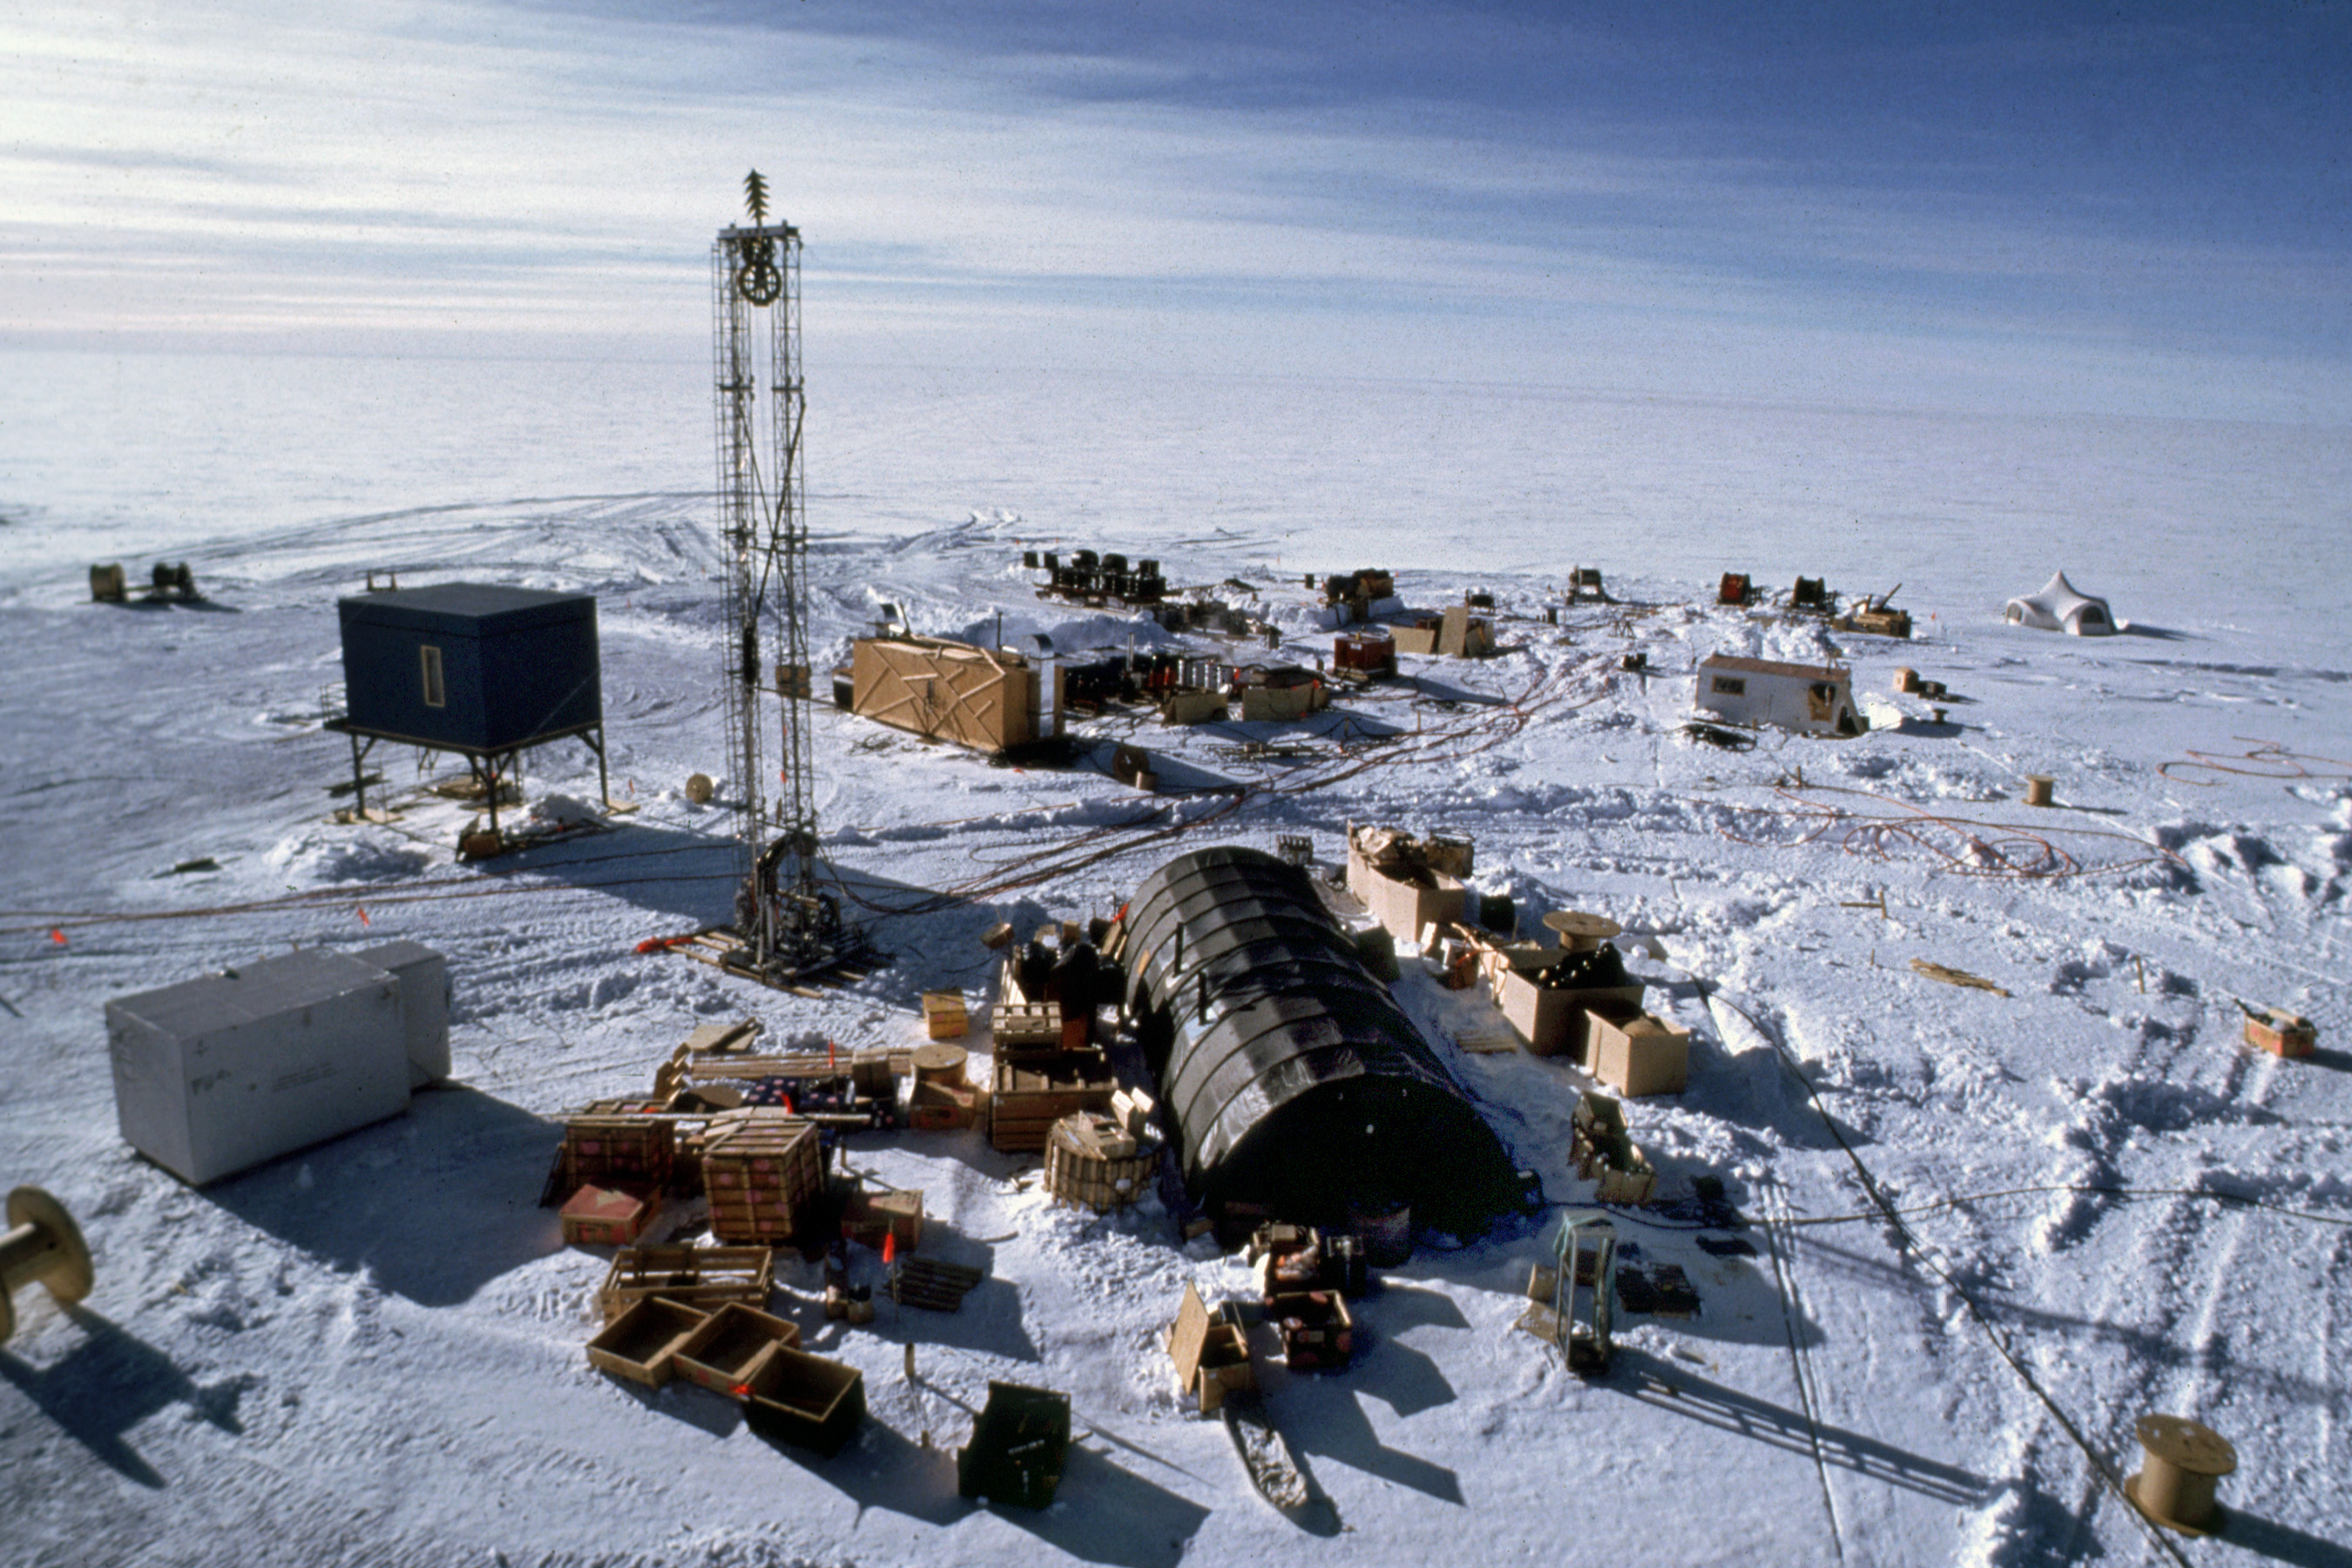 Supplies at the South Pole